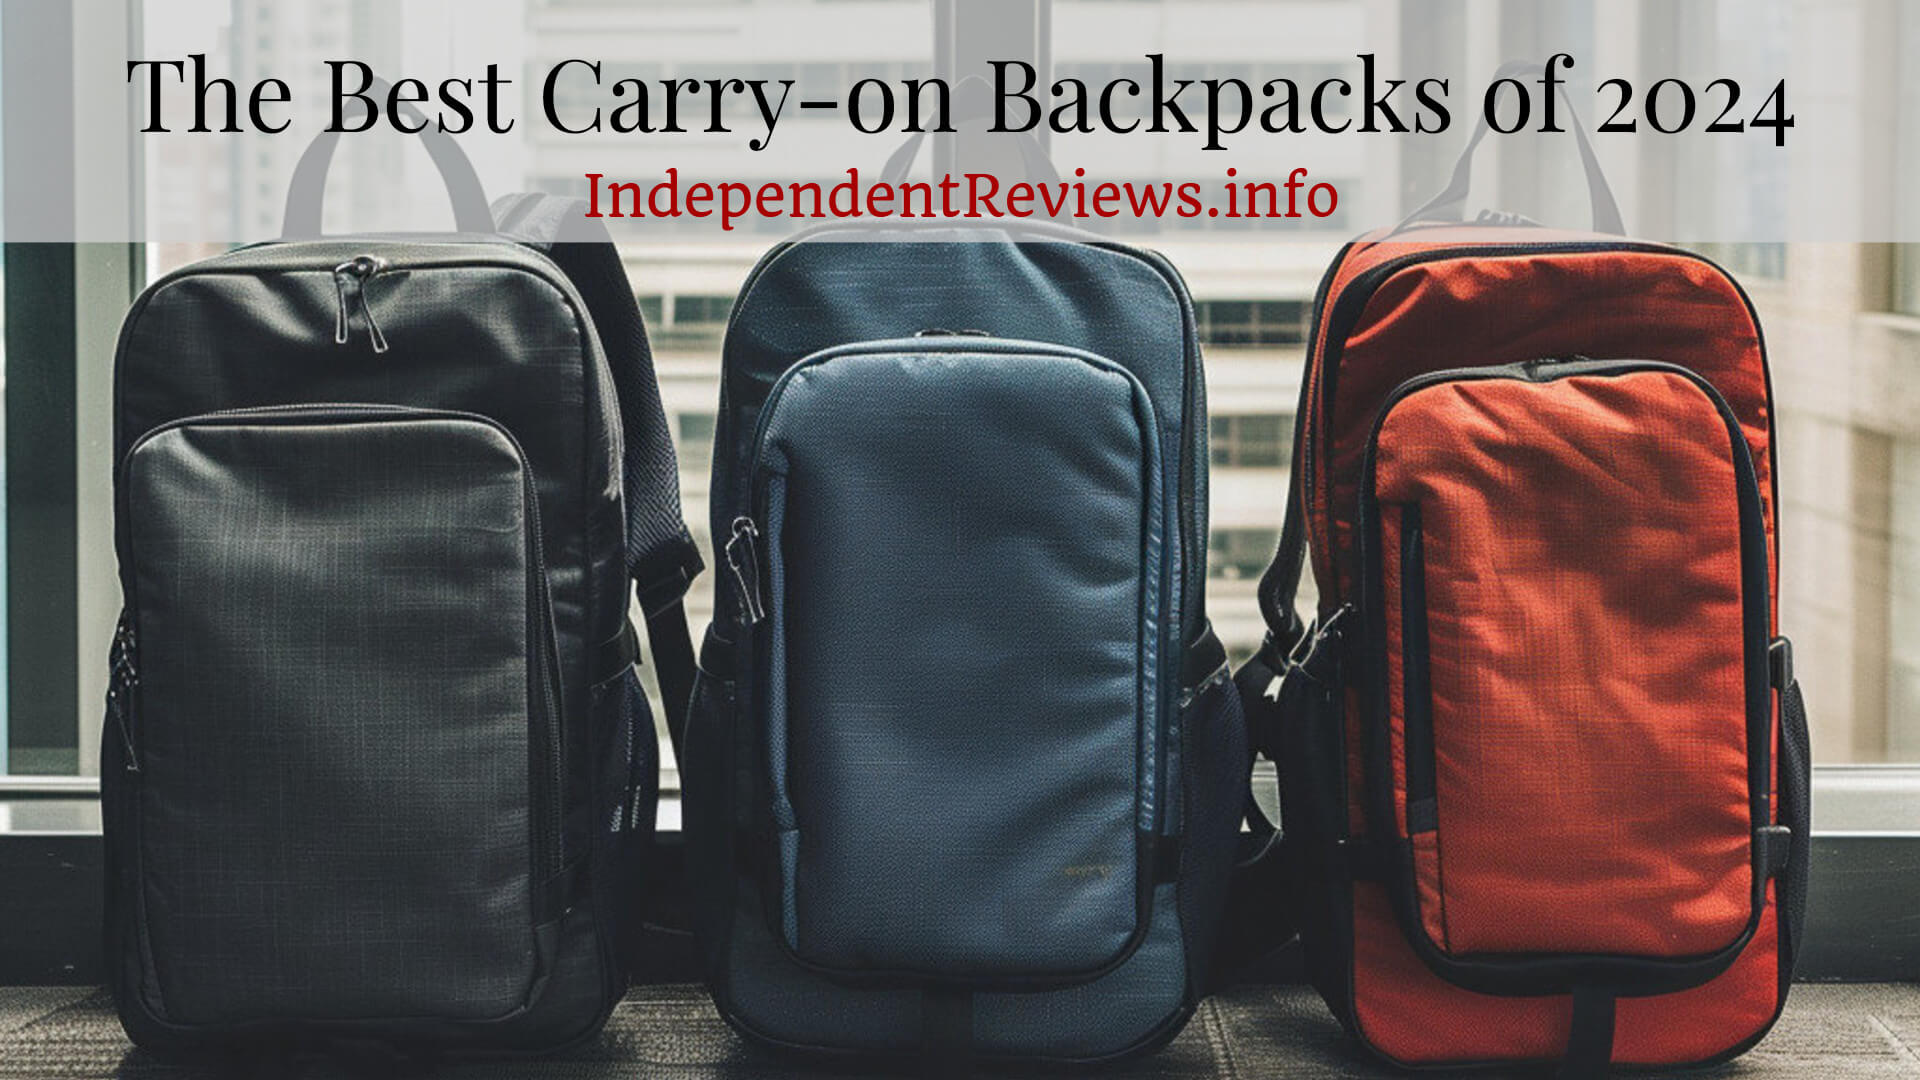 The Best Carry On Travel Backpack’s for 2024